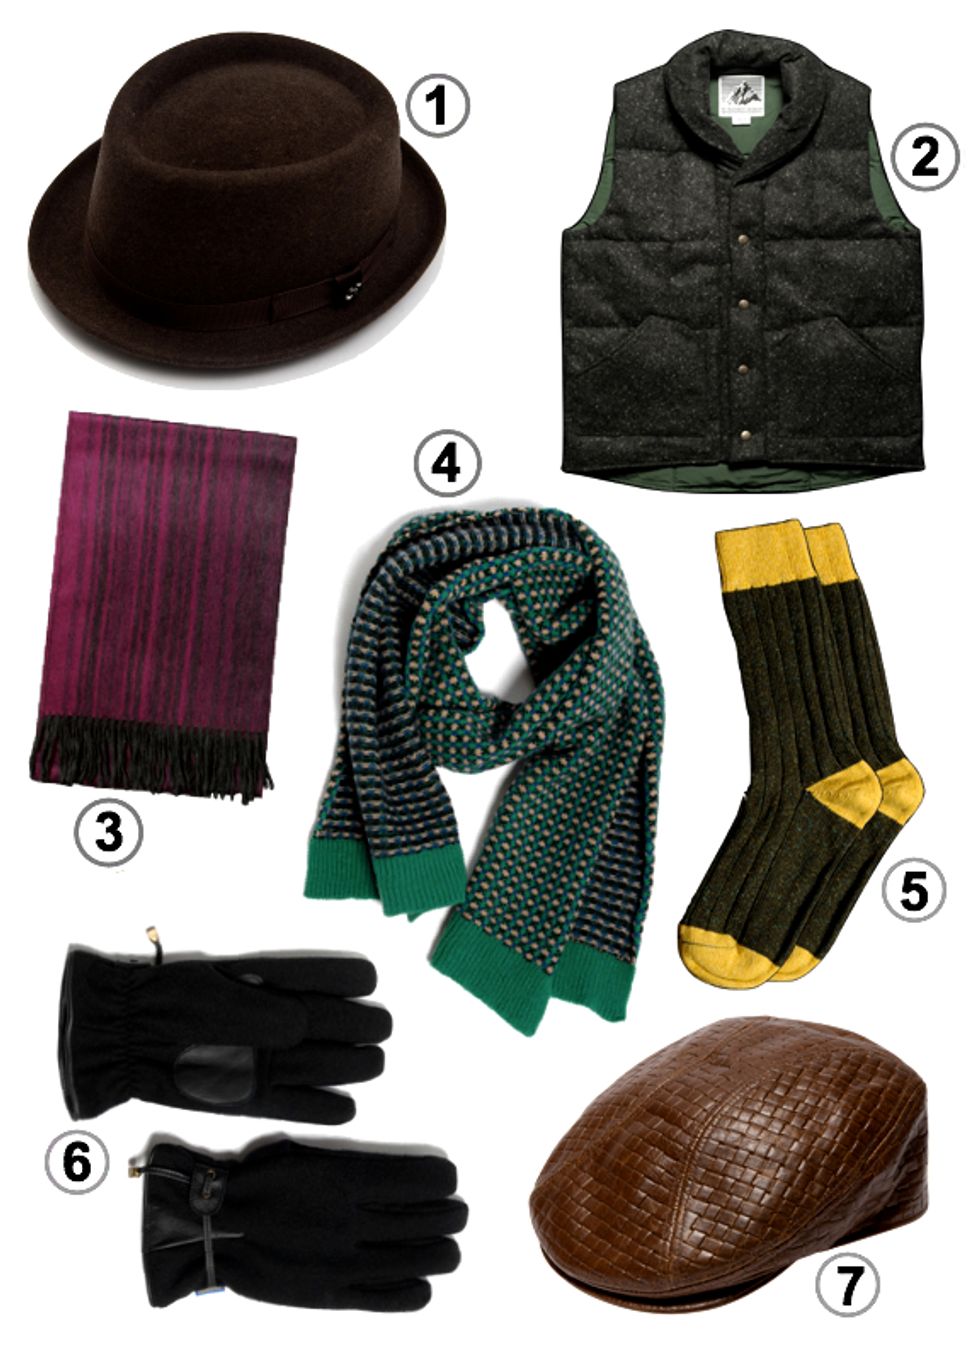 Look of the Week: Men's Cold Weather Accessories from Local Boutiques